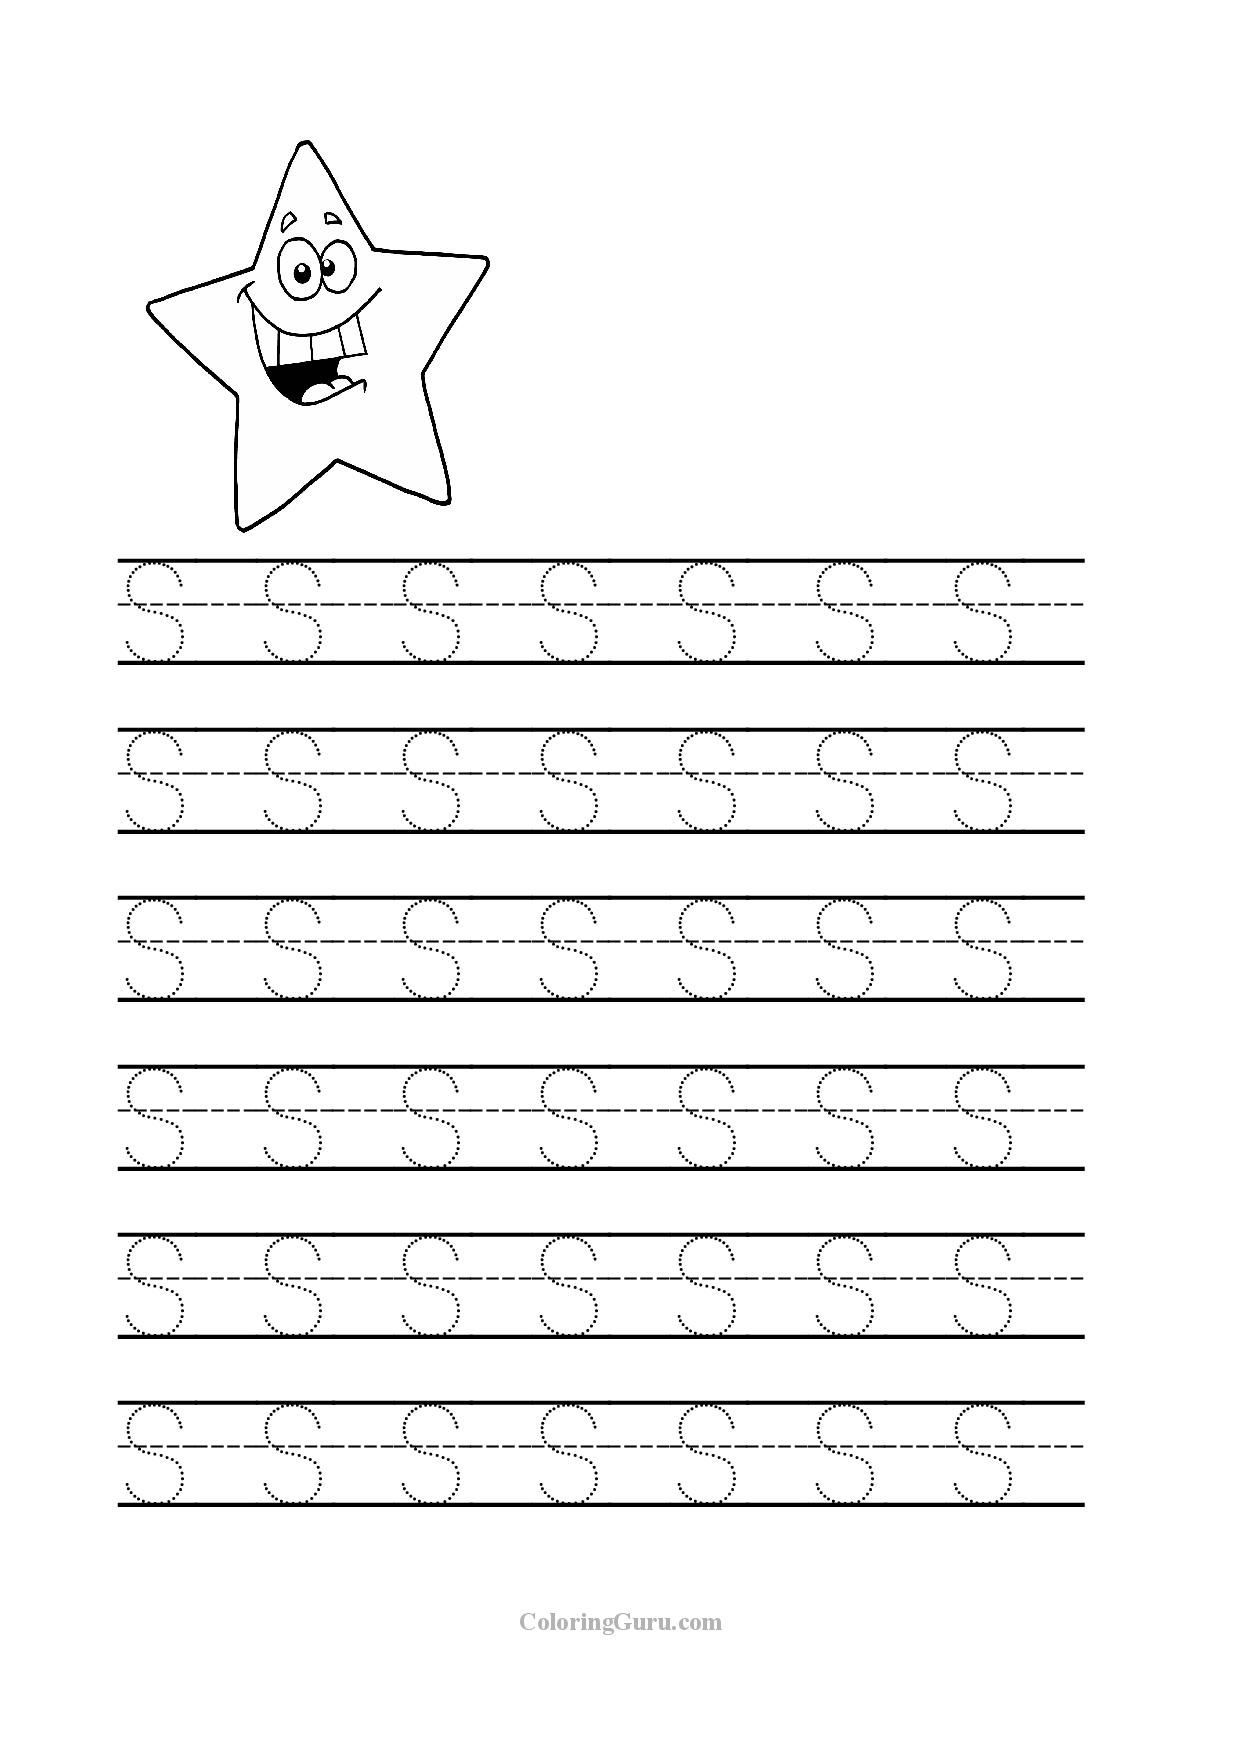 Free Printable Tracing Letter S Worksheets For Preschool with Tracing Letter S Worksheets